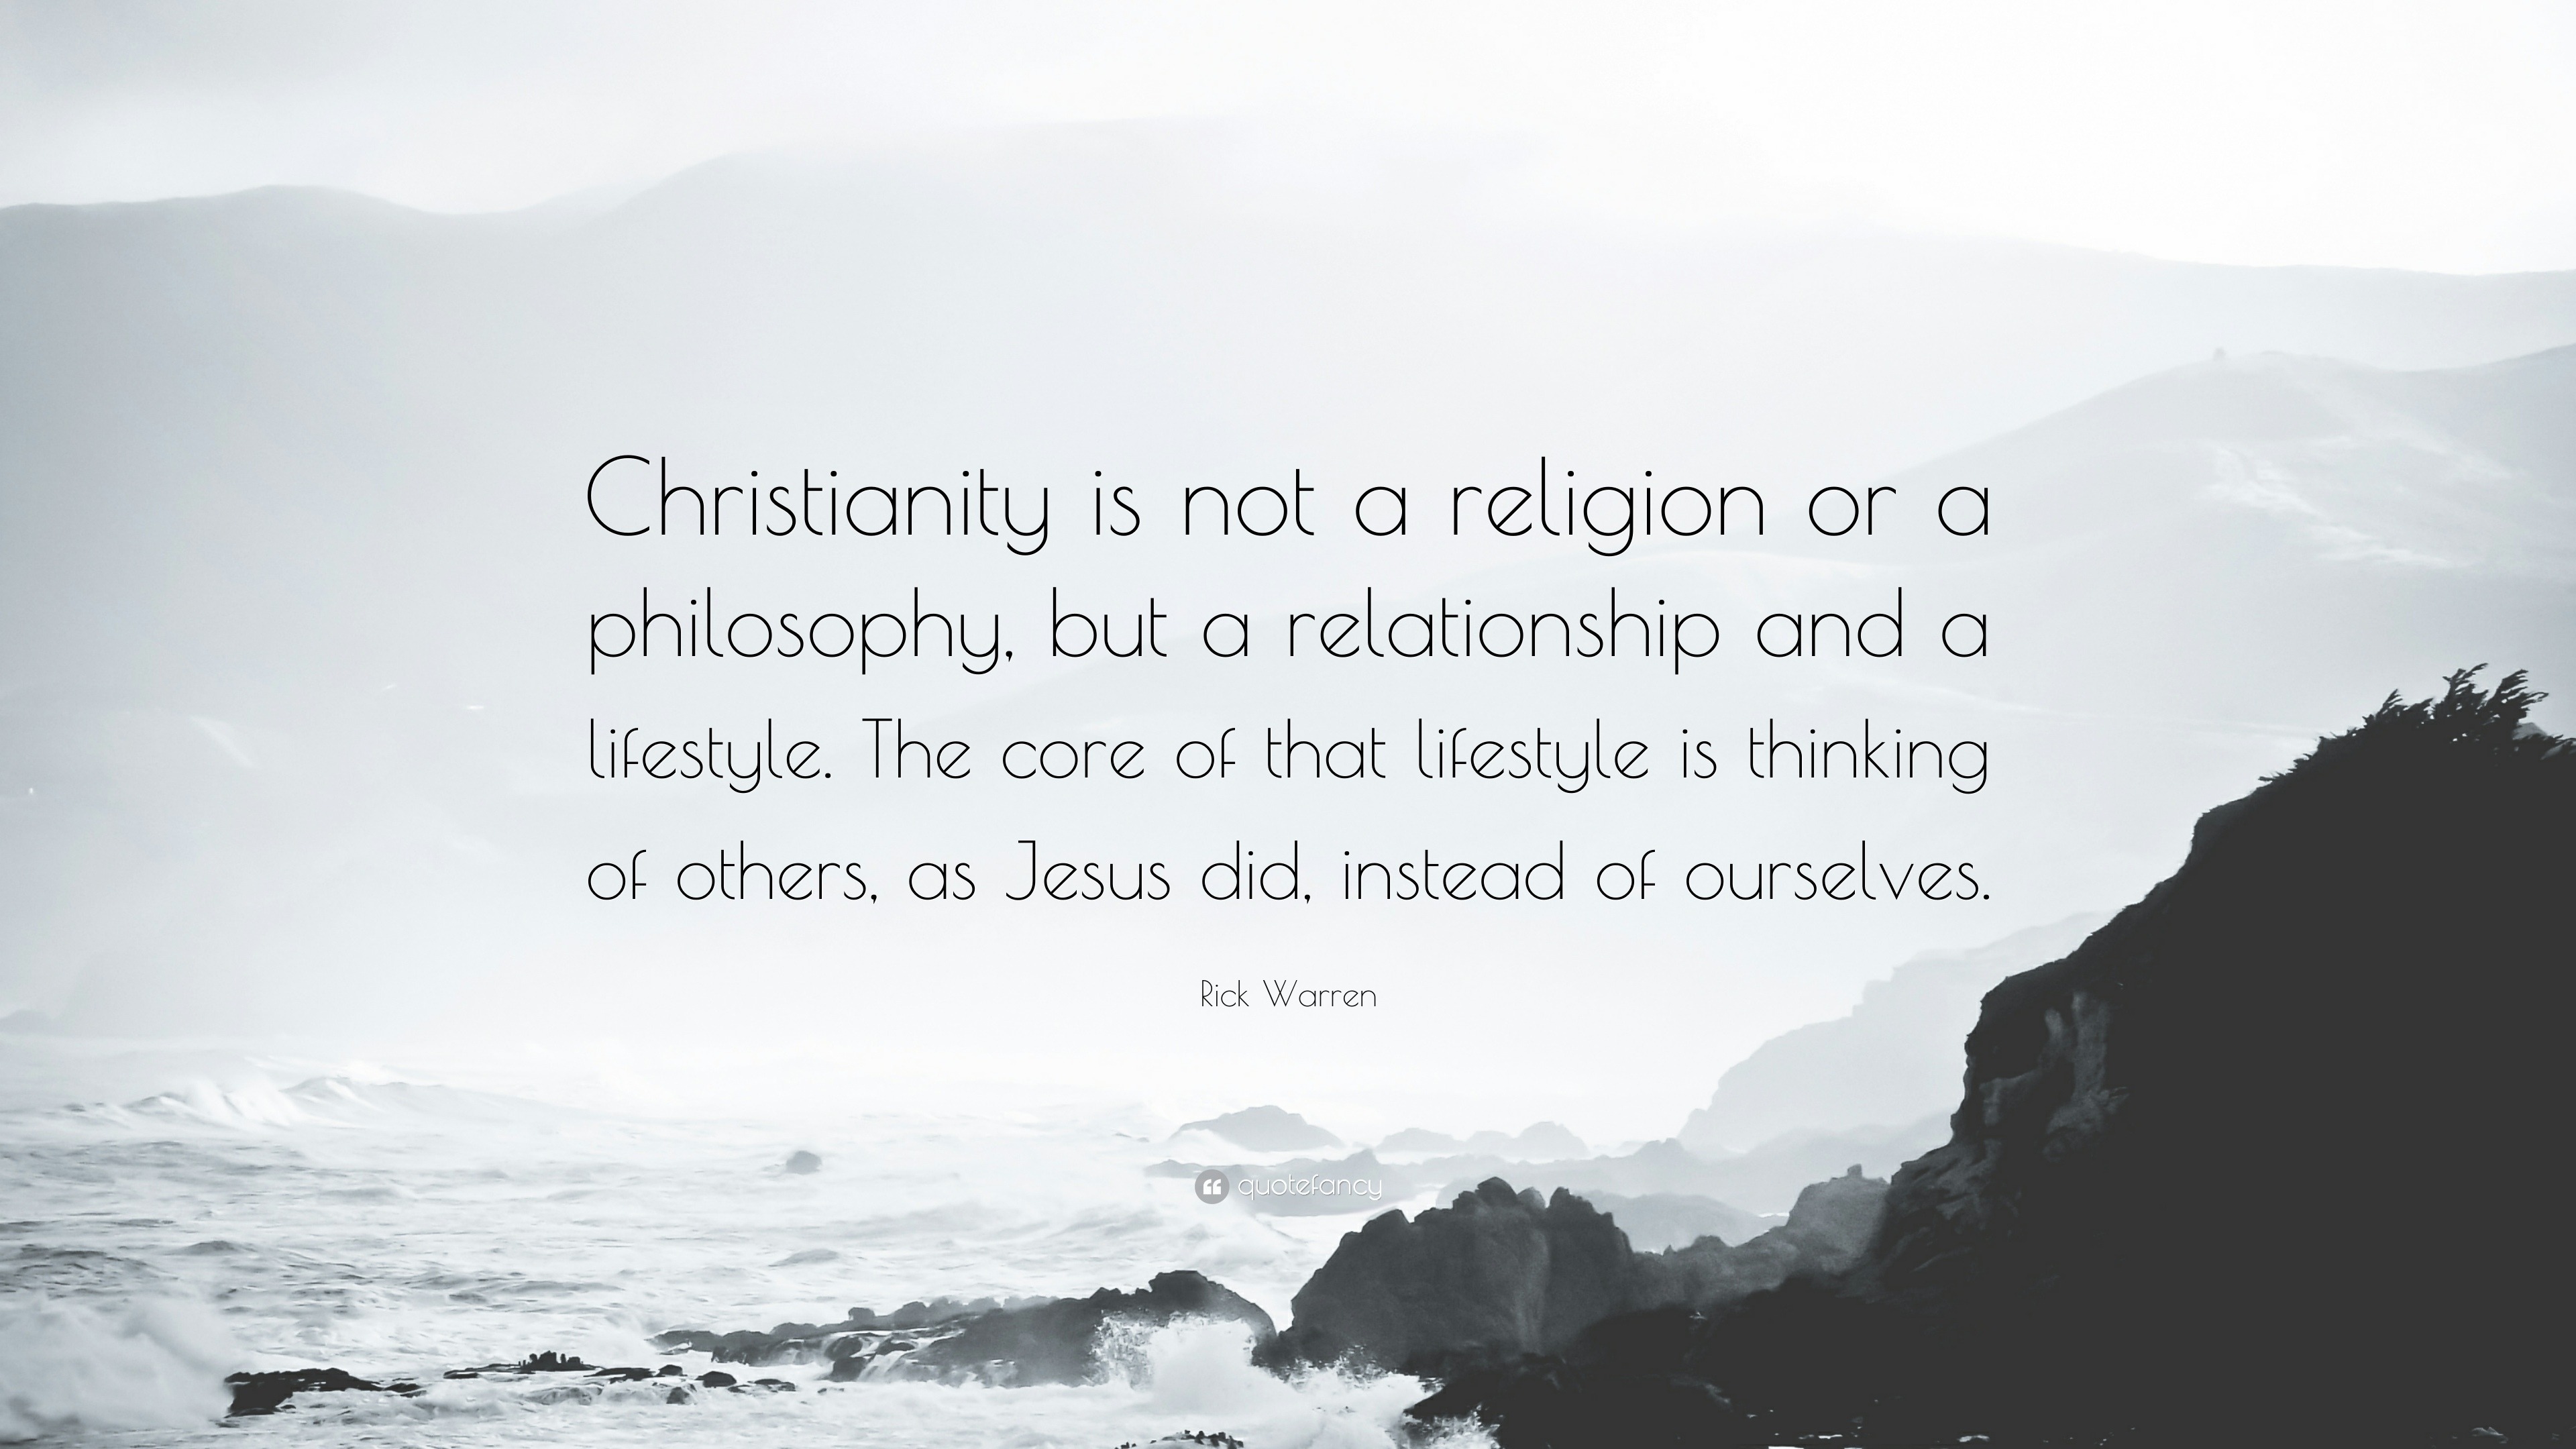 Rick Warren Quote “Christianity is not a religion or a